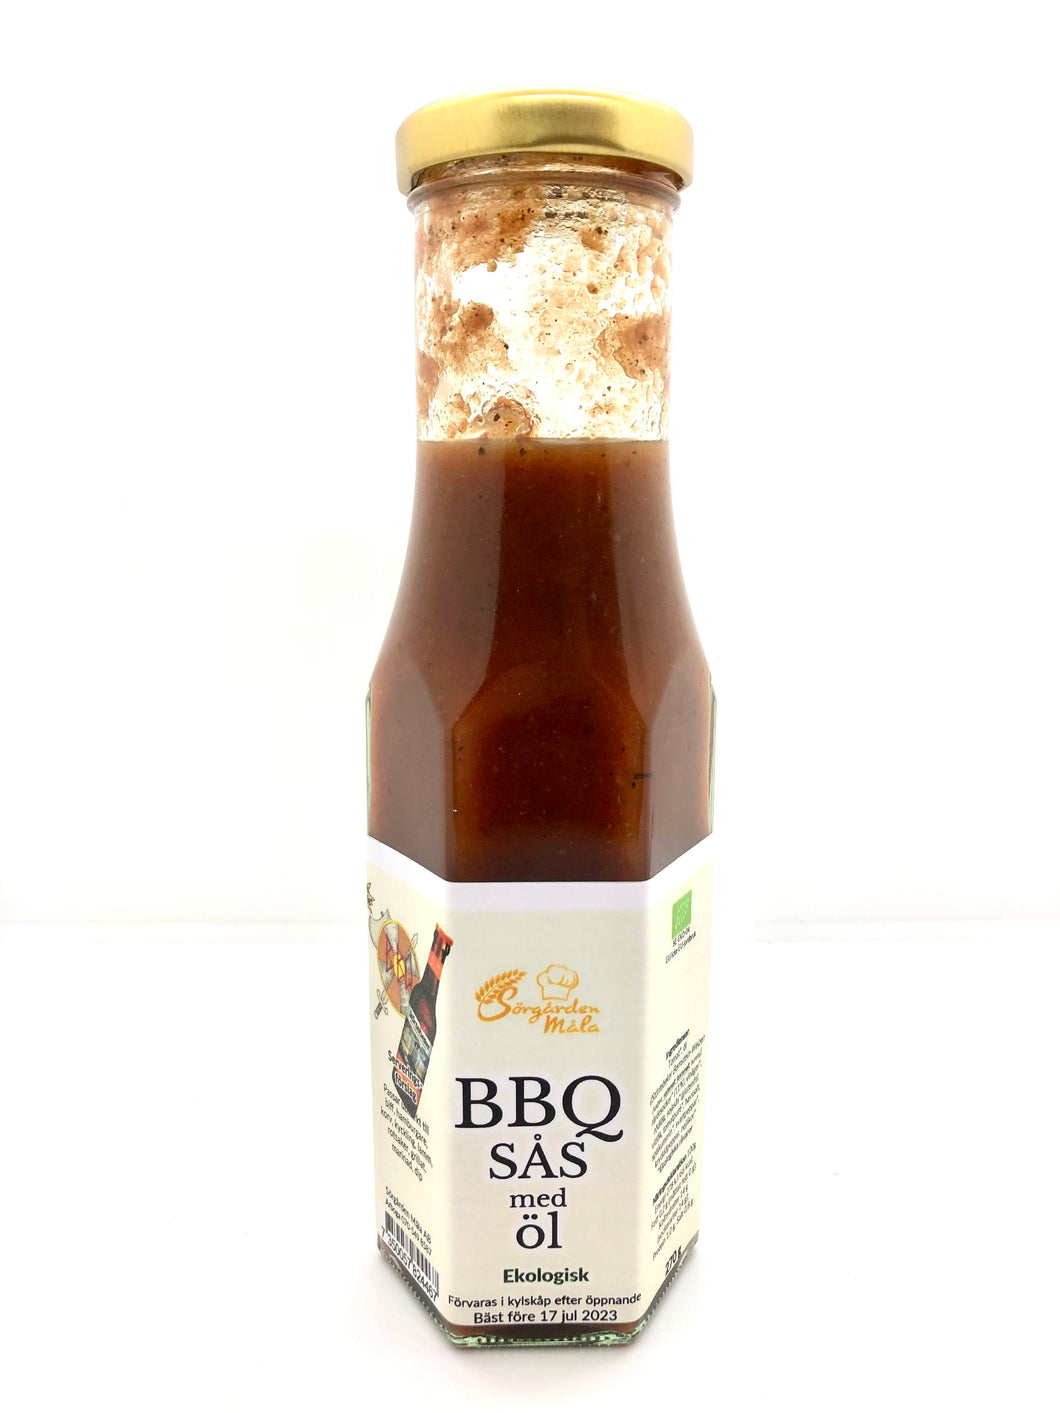 BBQ sauce with beer - like a bubbling spring stream